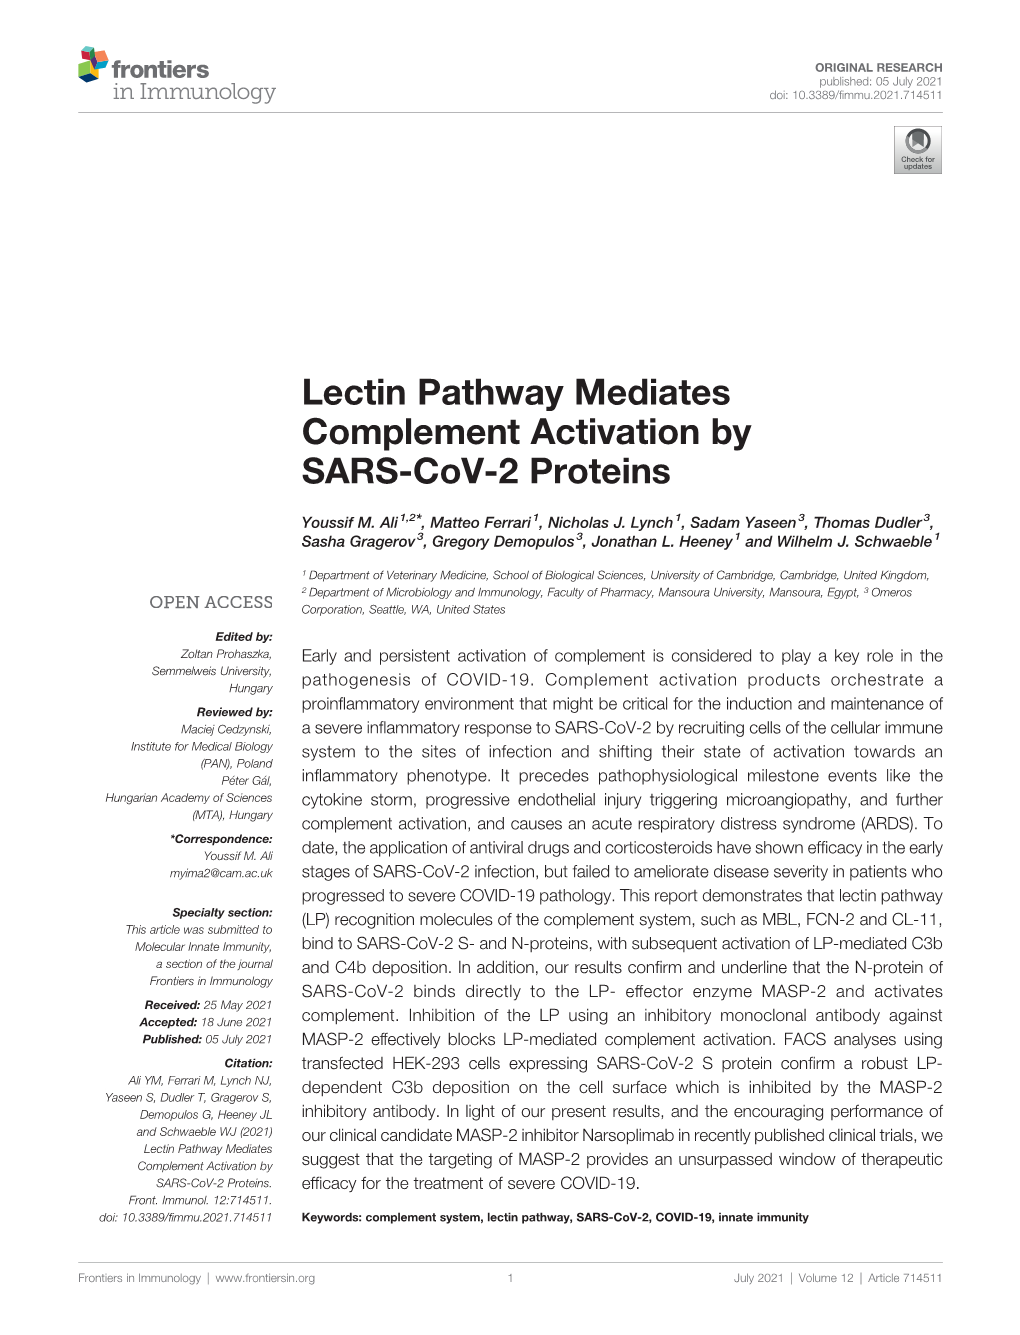 Lectin Pathway Mediates Complement Activation by SARS-Cov-2 Proteins